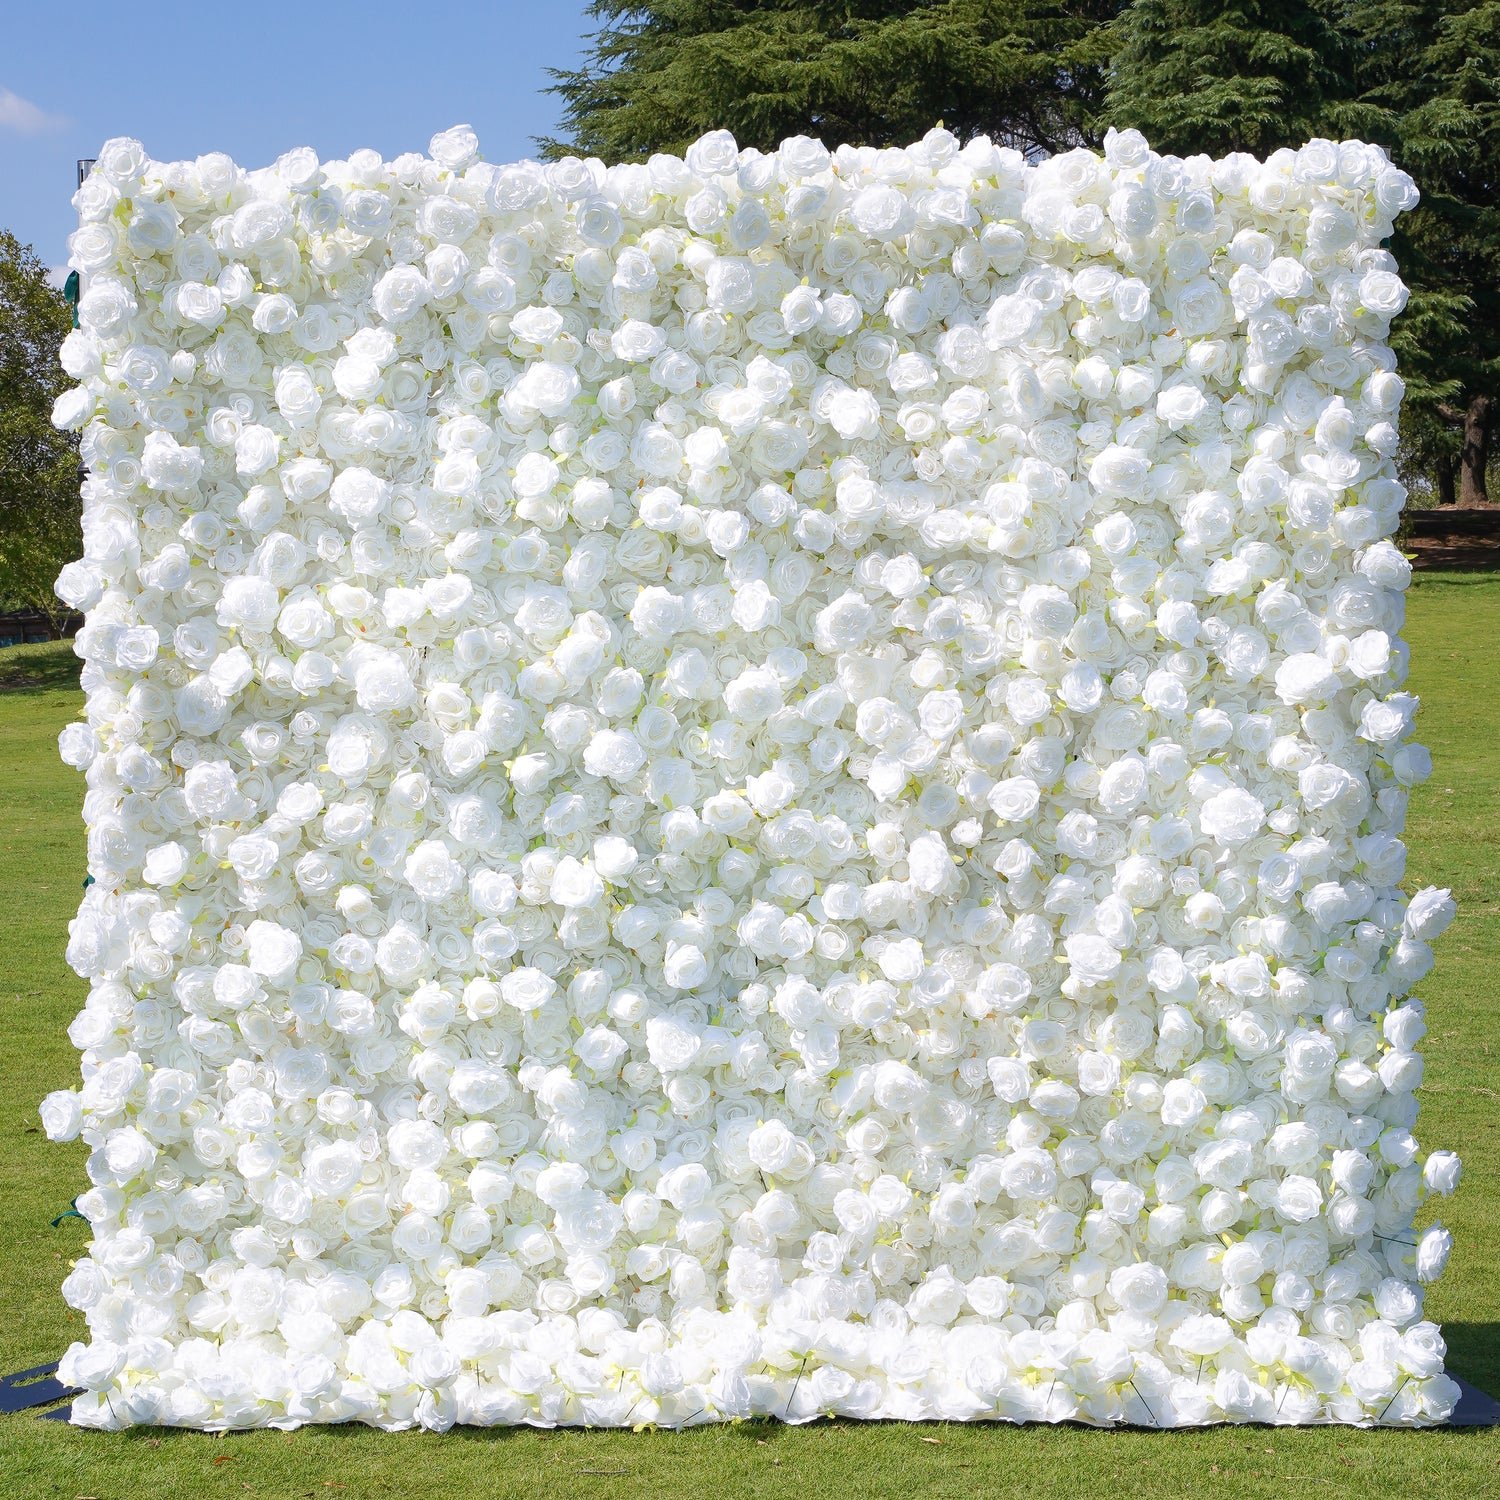 White Rose Wall Rental - Riverside Flower Wall Rental - Perfect Capture Booth | Photo Booth Rental.jpeg